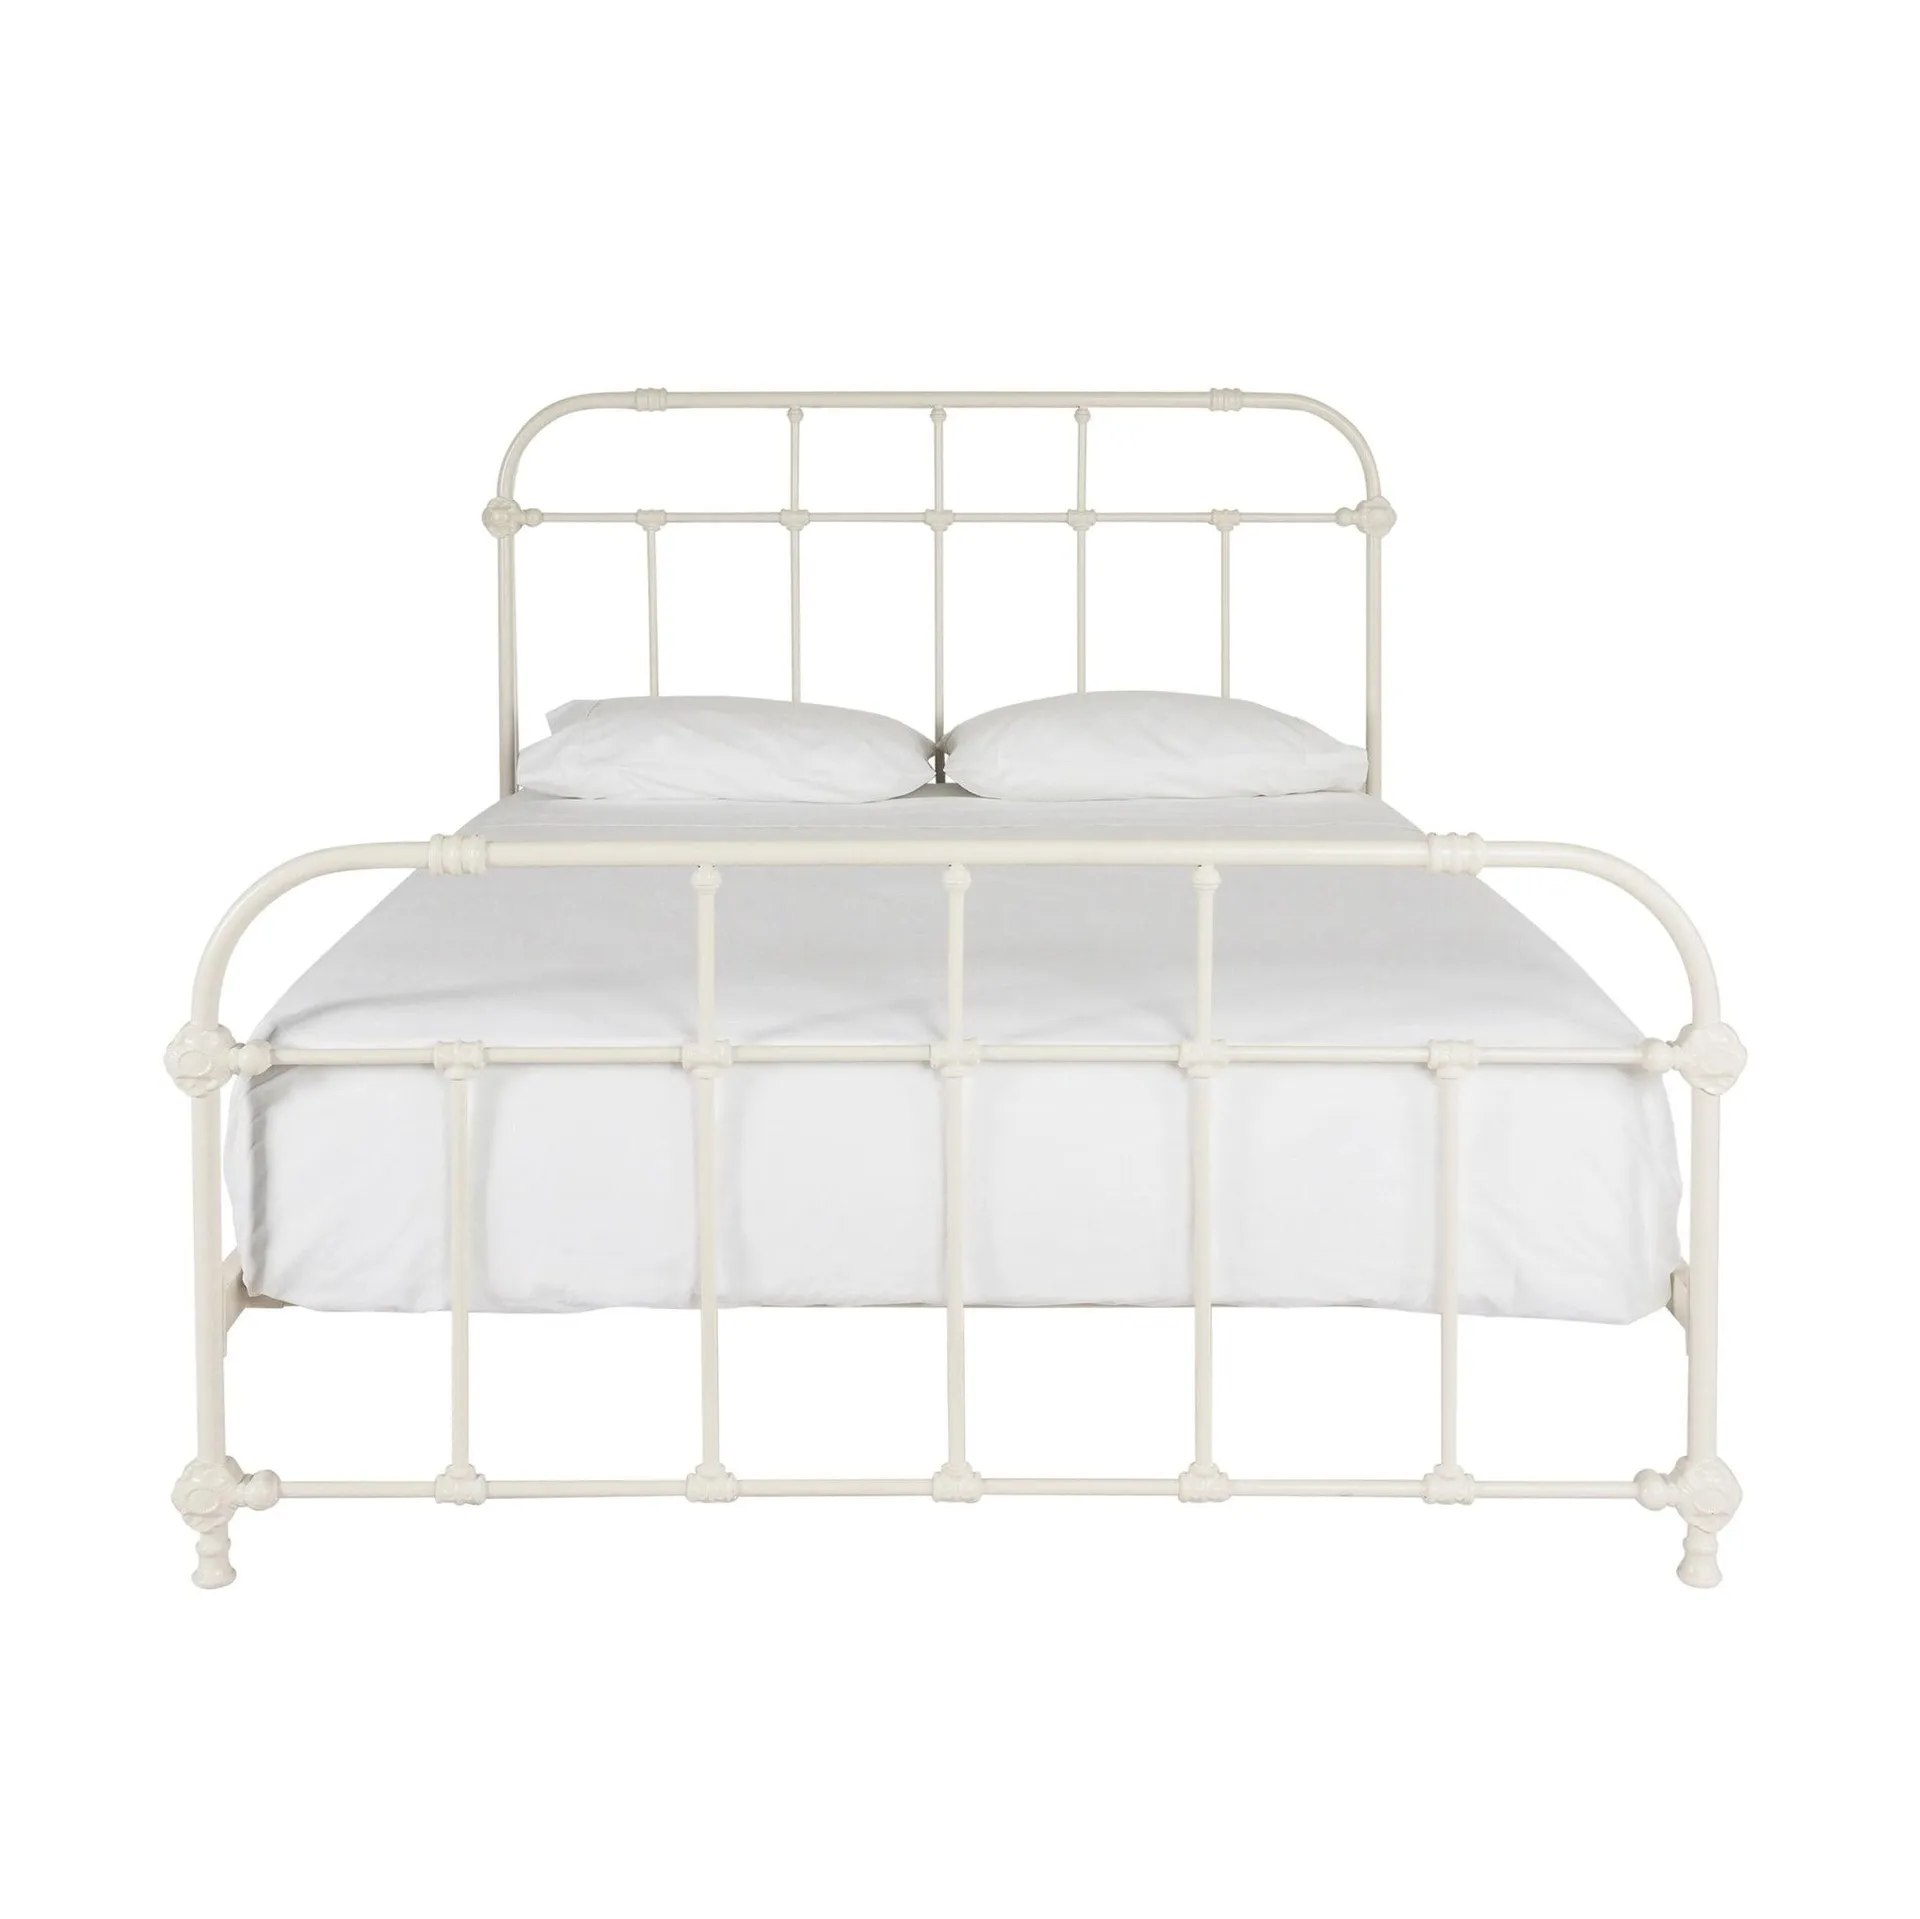 NZ Manor King Bed White